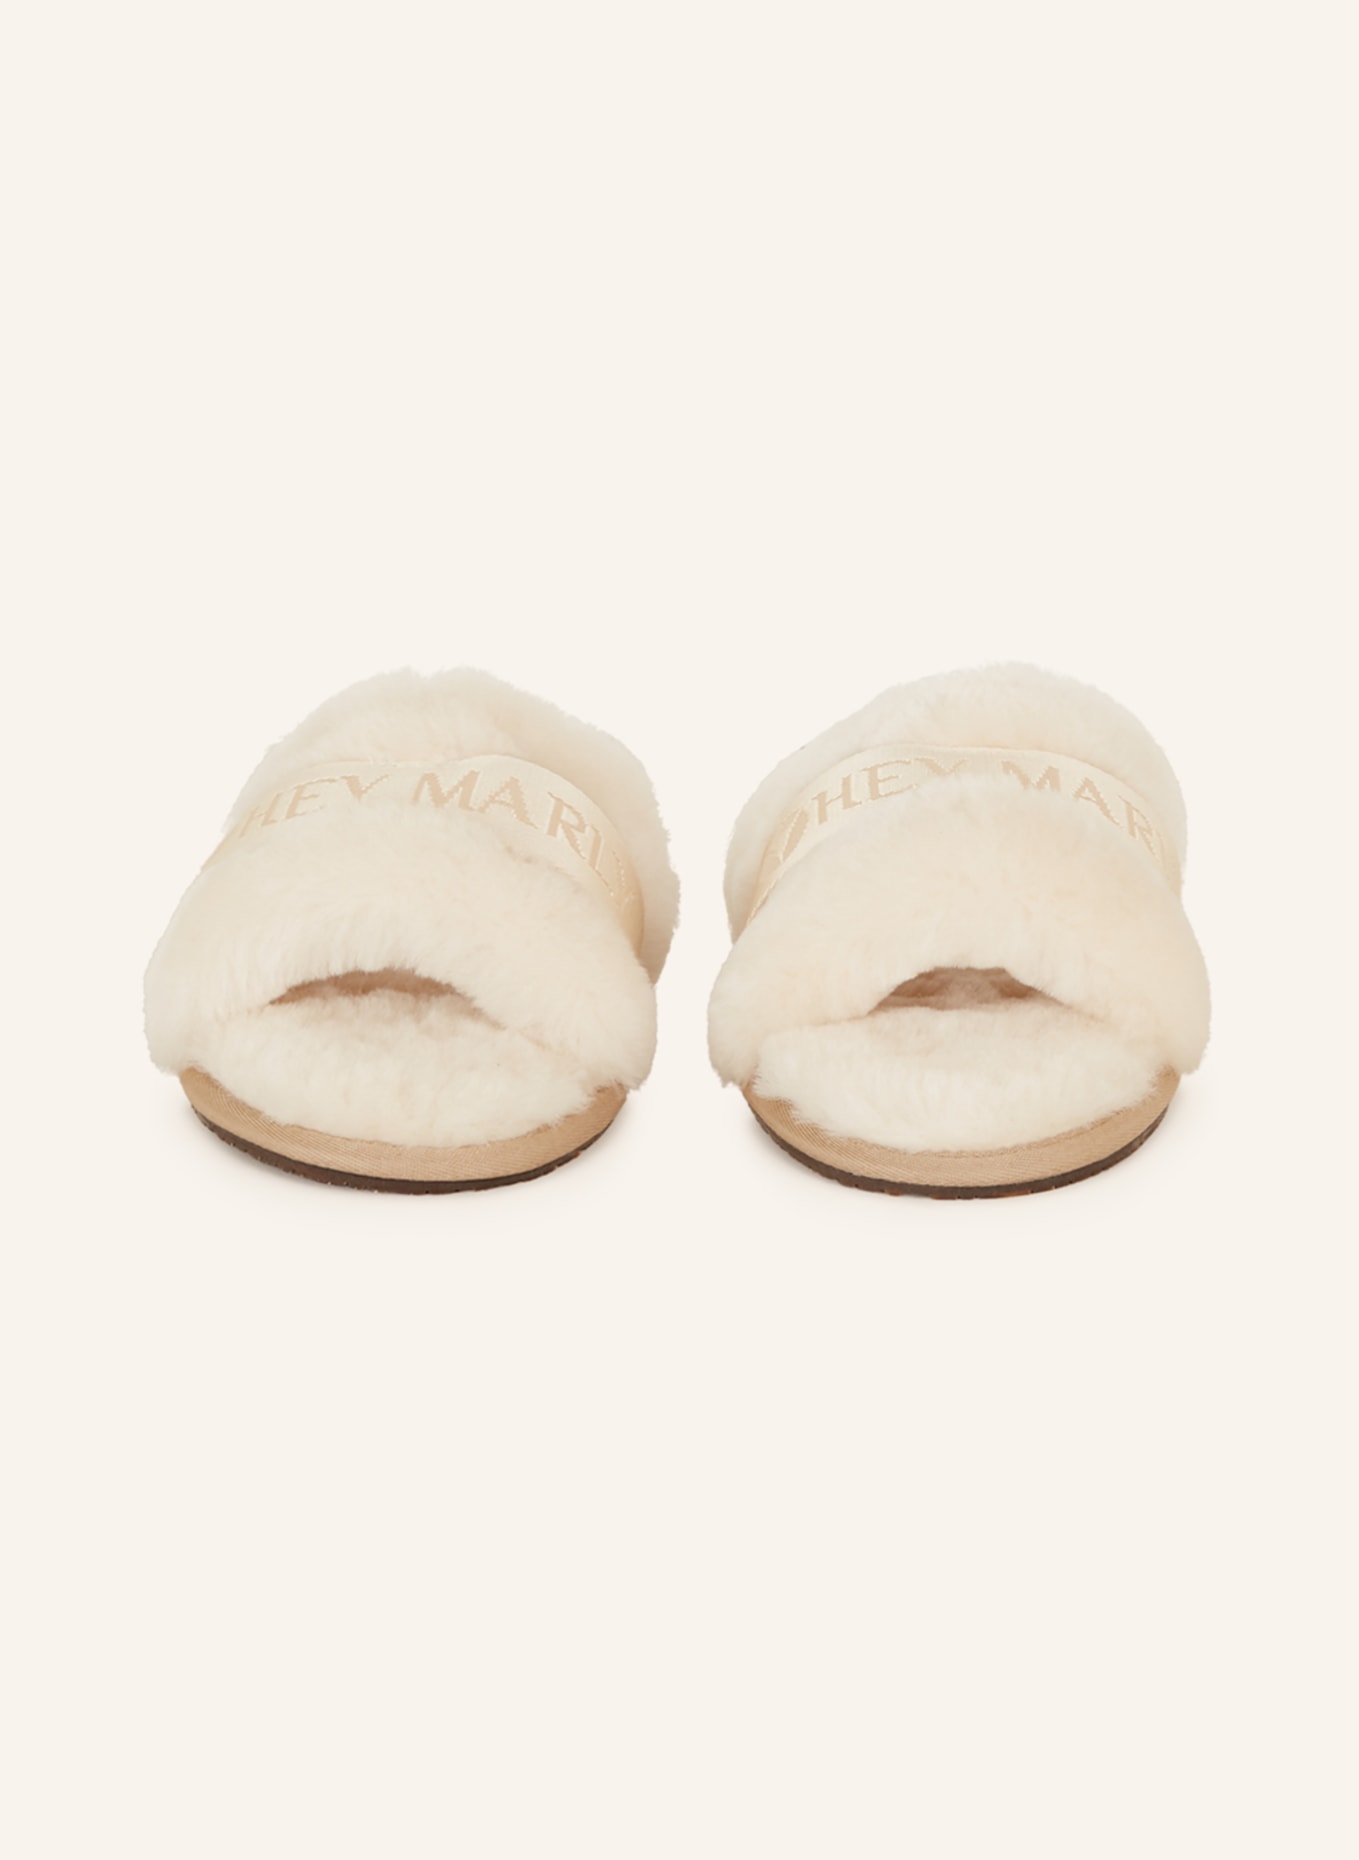 HEY MARLY Slippers SIGNATURE, Color: CREAM (Image 3)